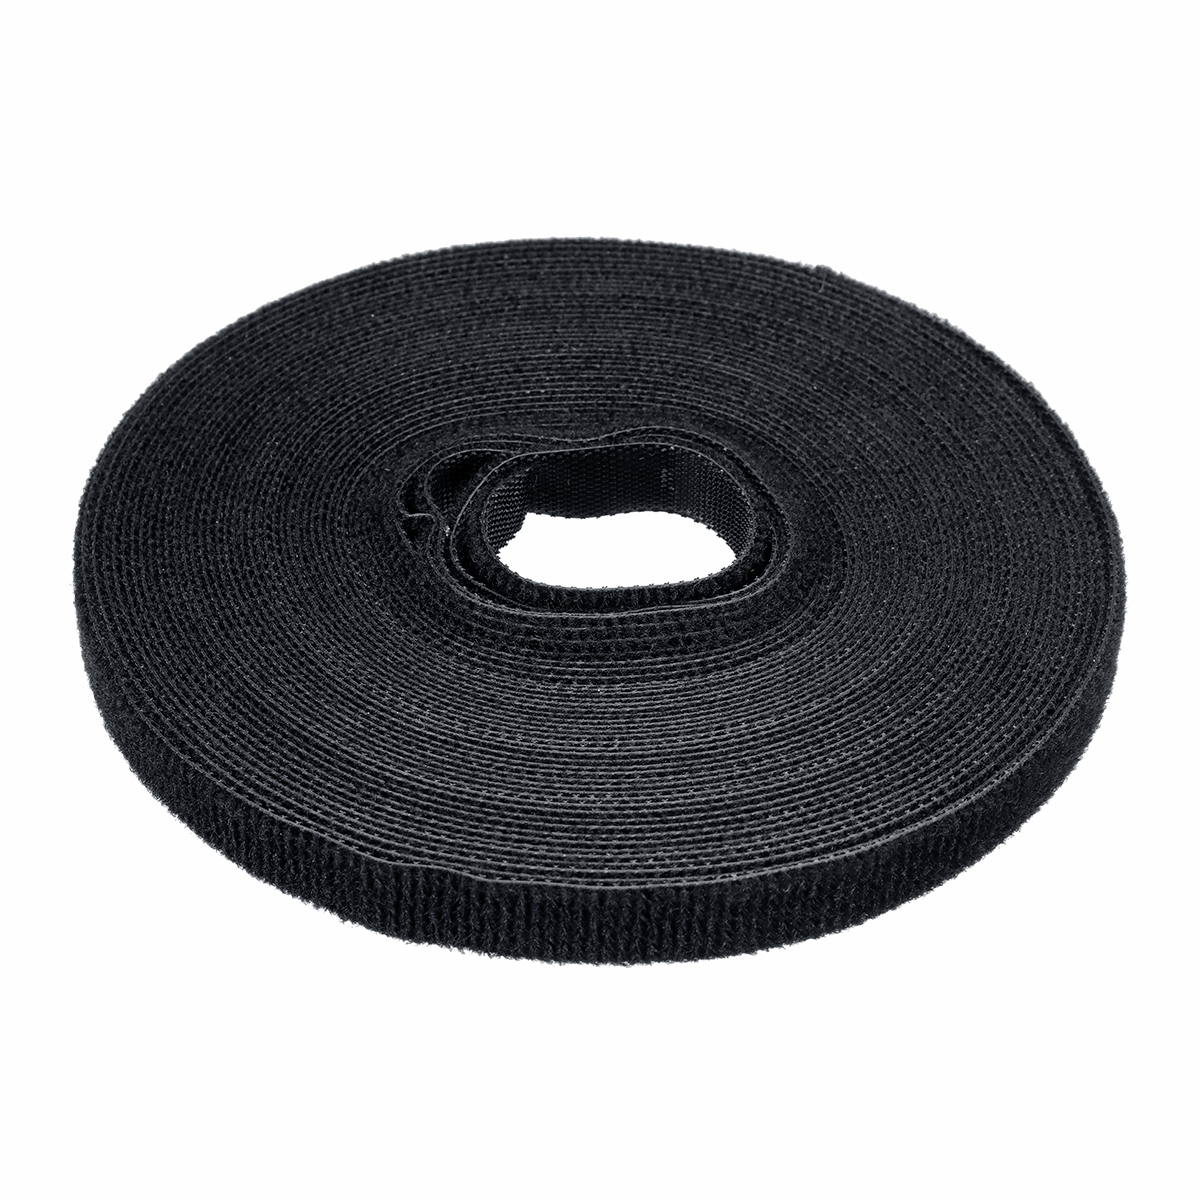 Find 10m Nylon Cable Ties Wrap Ties Fastening Cables Wire Cable Line Holder Winder Clip for Sale on Gipsybee.com with cryptocurrencies